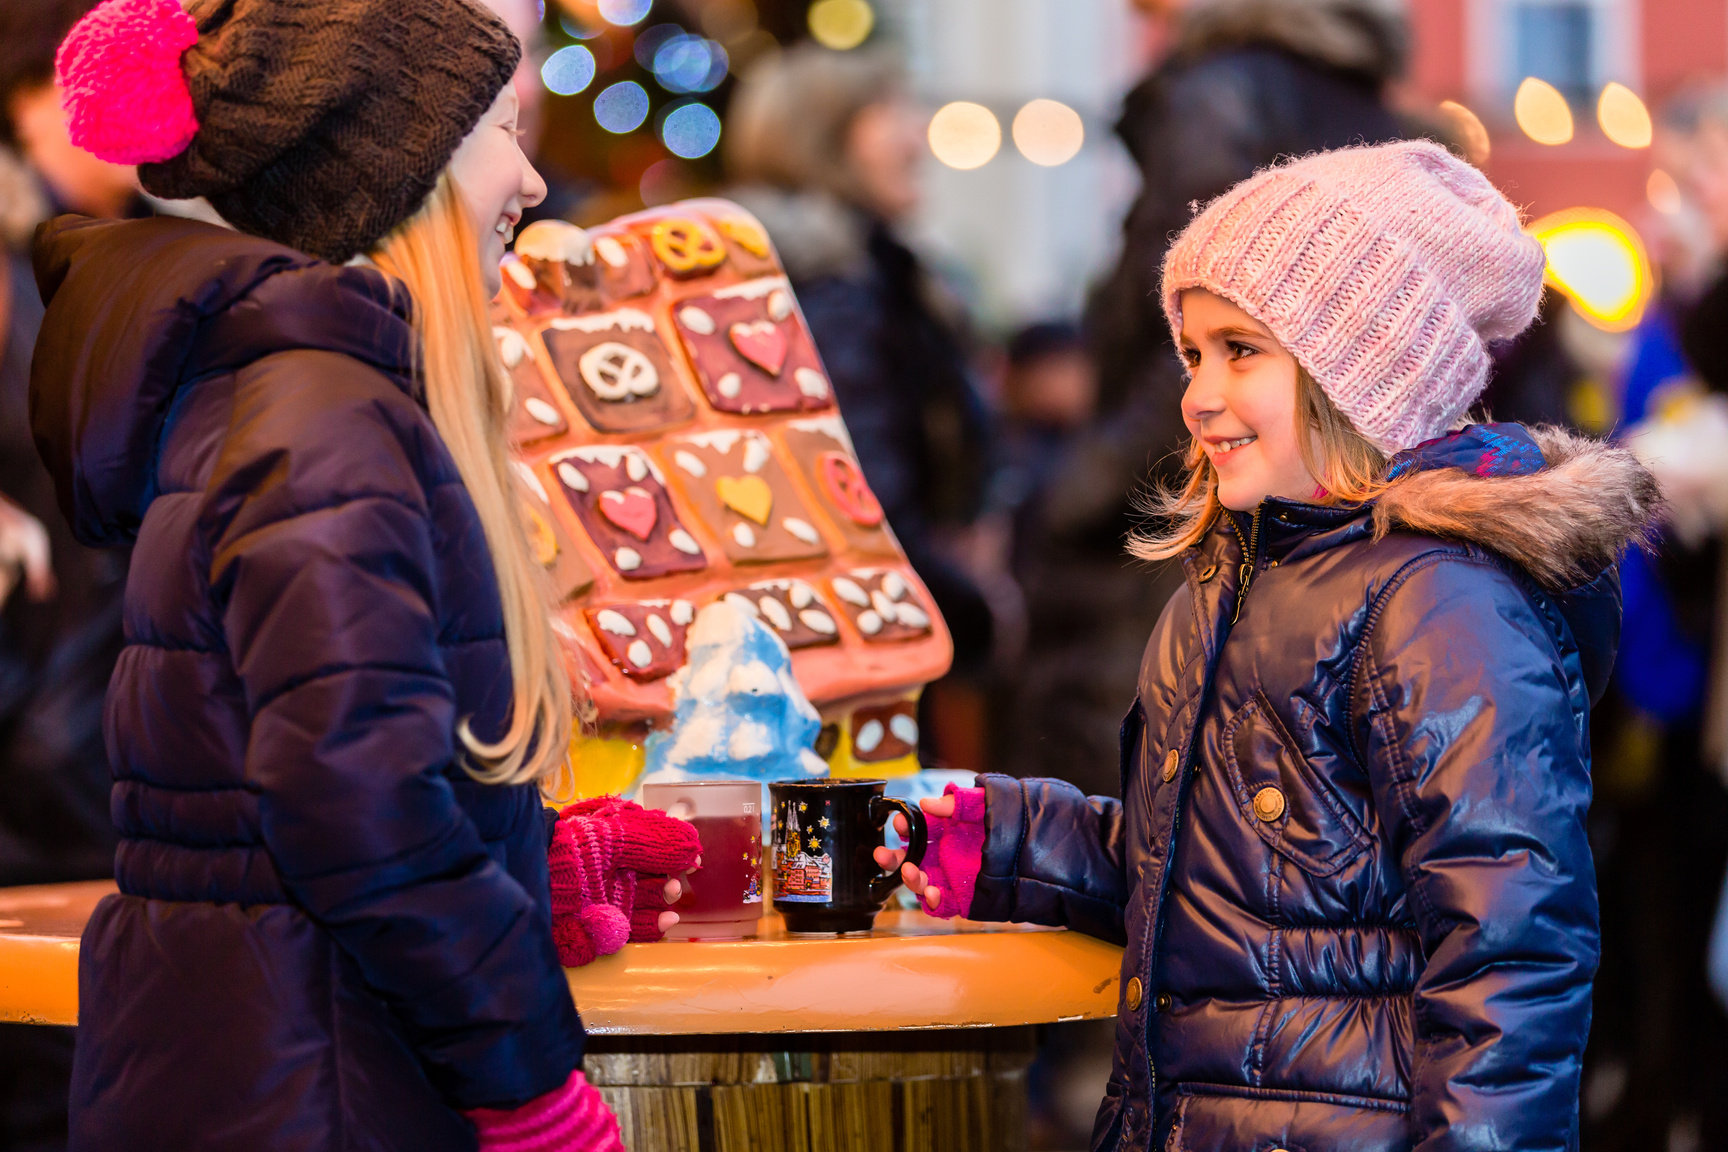 Children on Christmas Market with Gingerbread